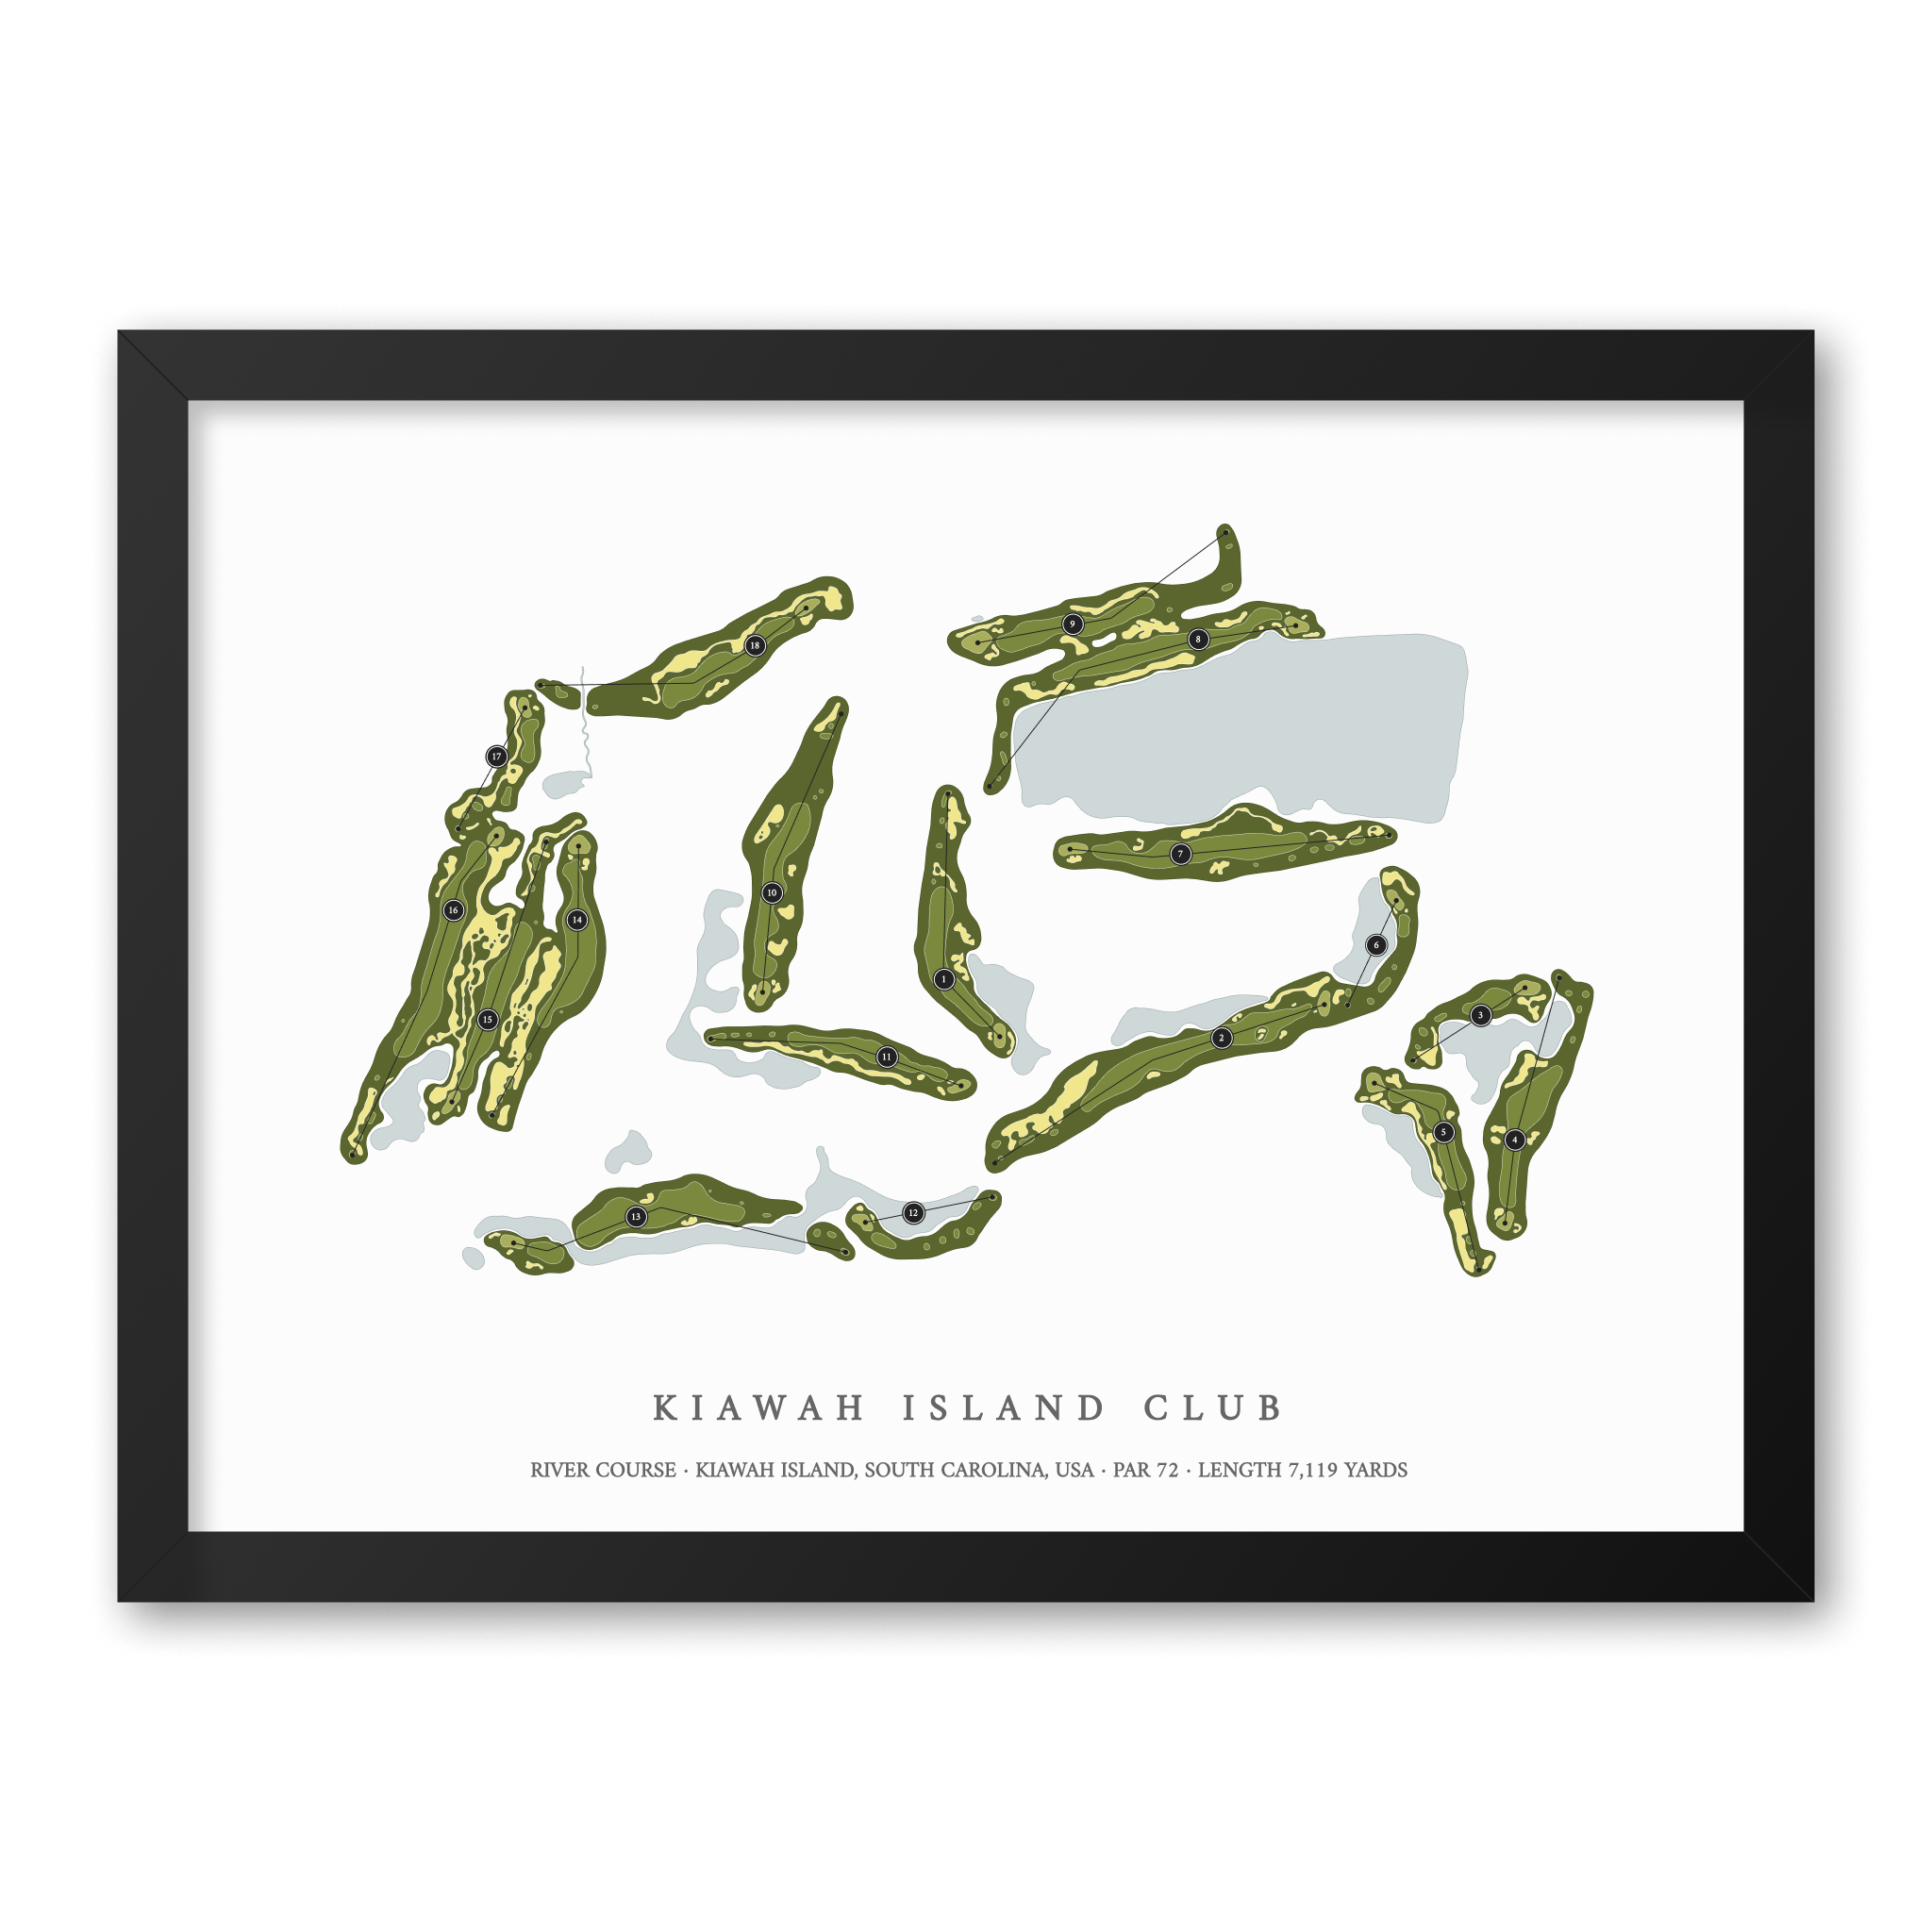 Kiawah Island Club - River Course | Golf Course Map | Black Frame With Hole Numbers #hole numbers_yes